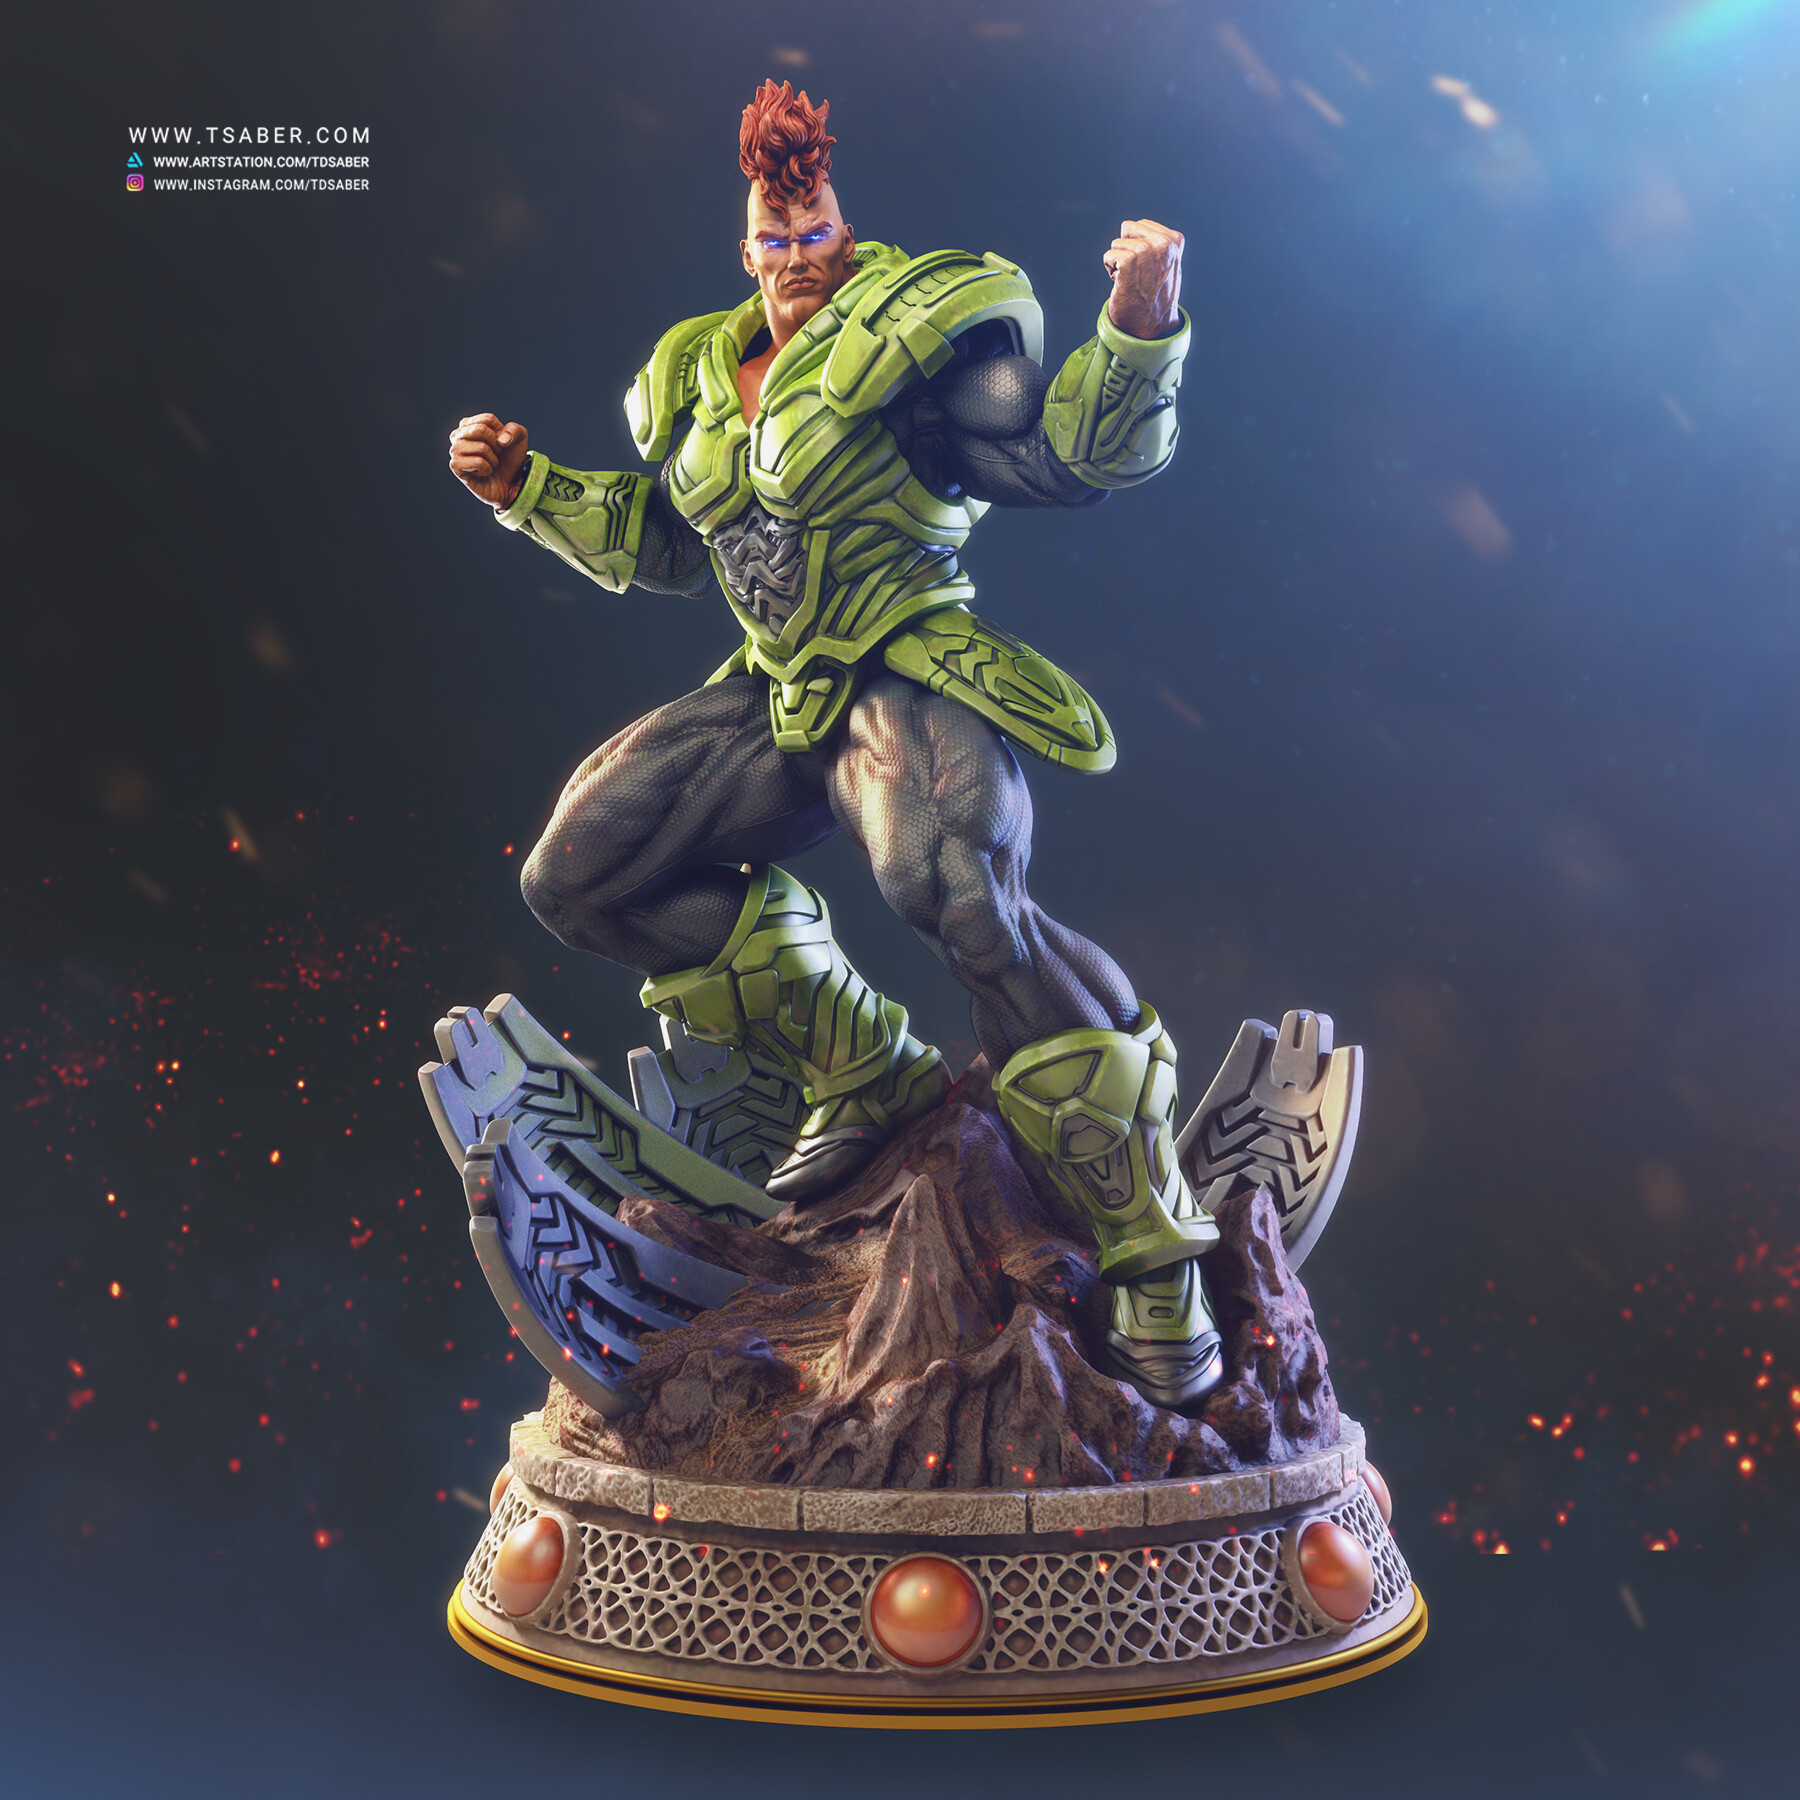 ArtStation - android 16 from dragon ball z